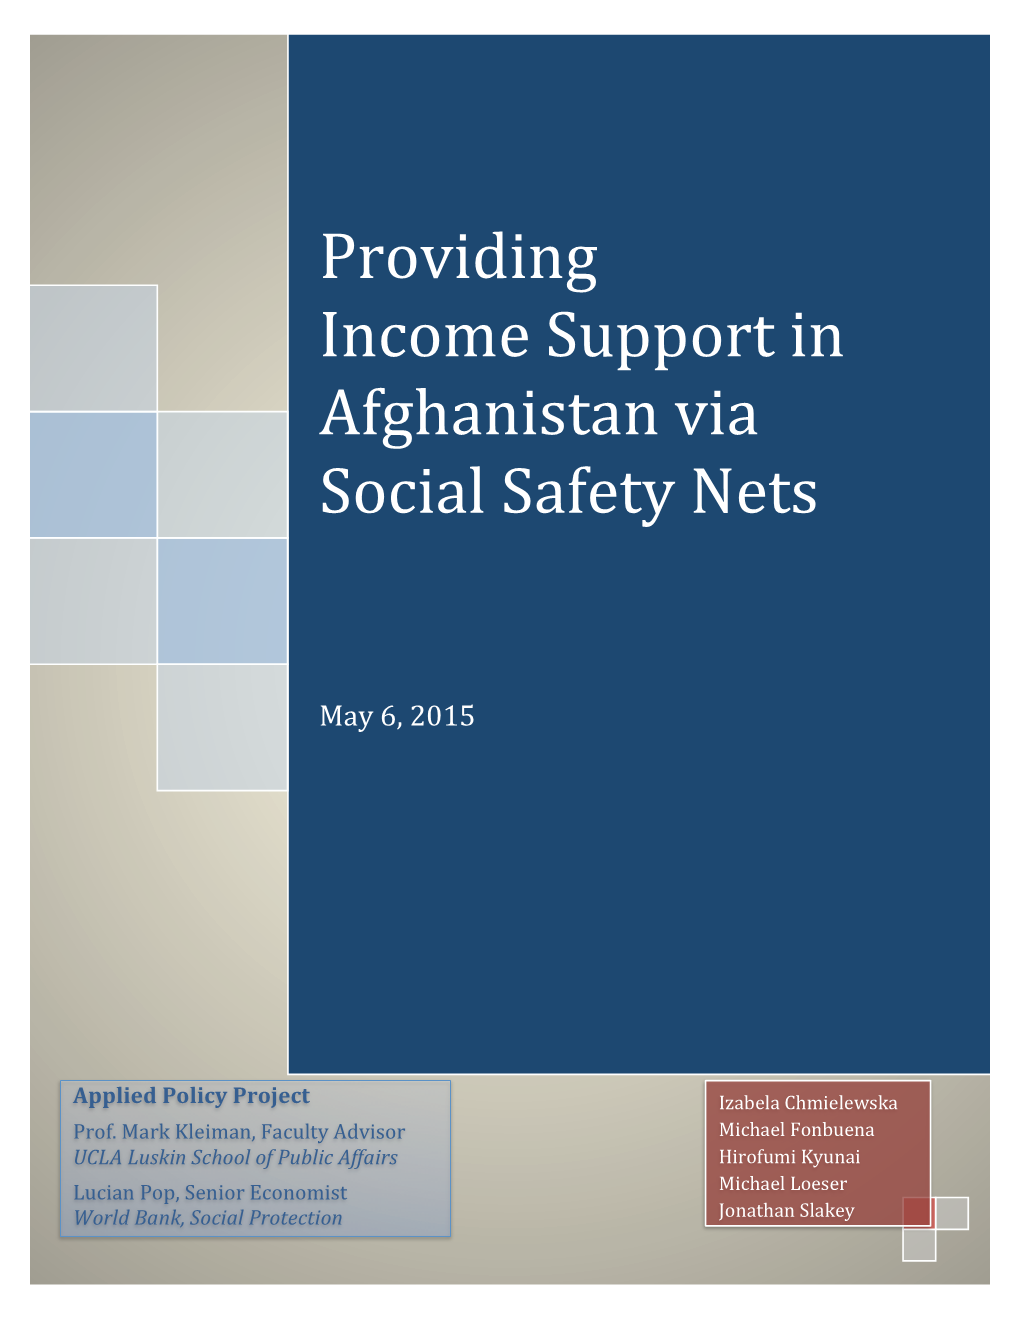 Providing Income Support in Afghanistan Via Social Safety Nets